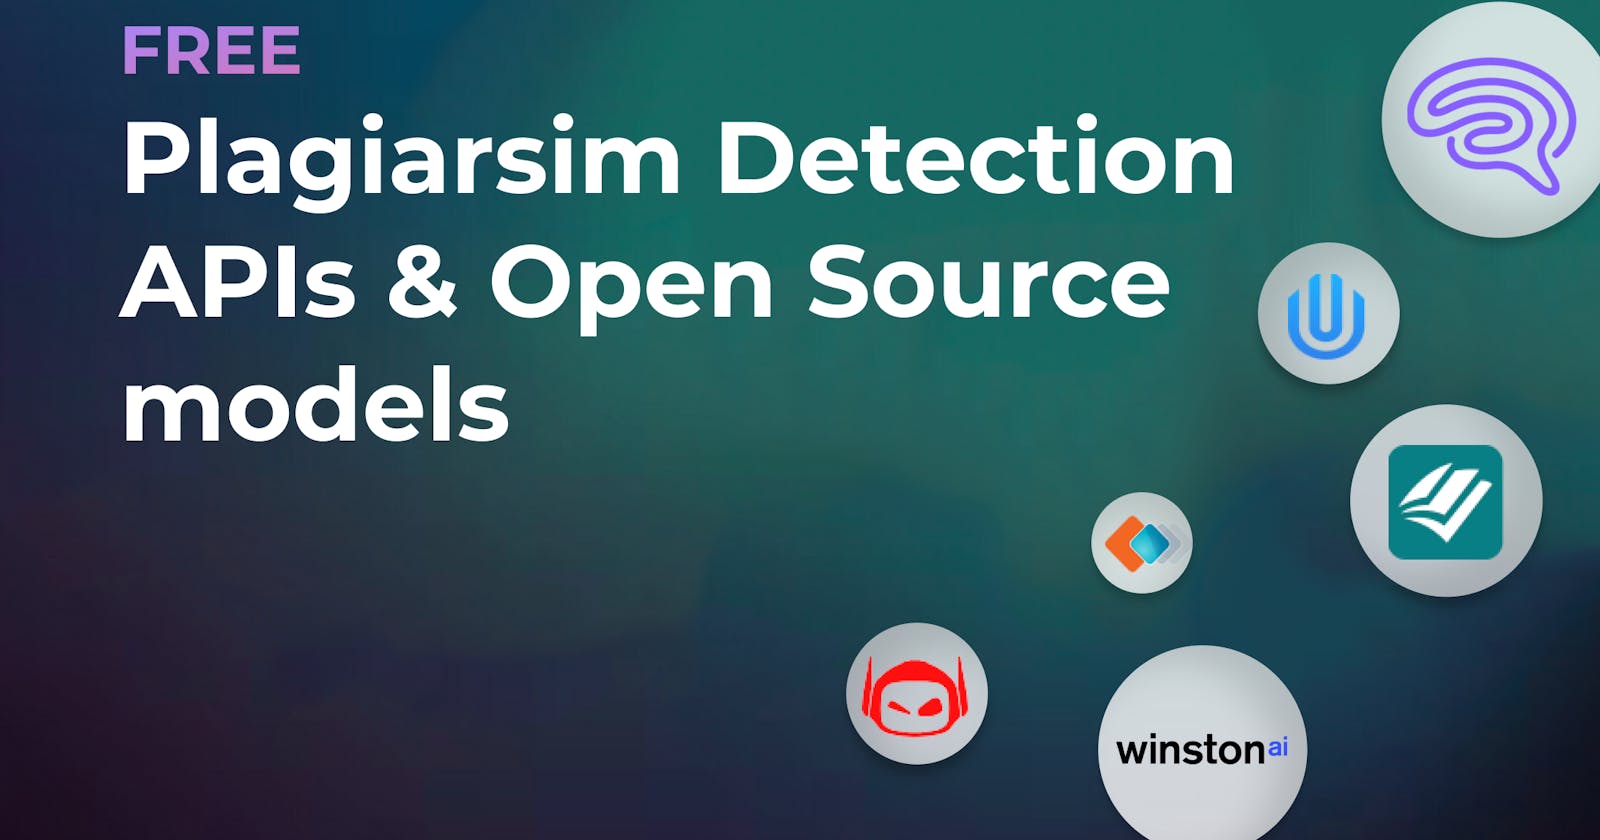 Top Free Plagiarism Detection tools, APIs, and Open Source models